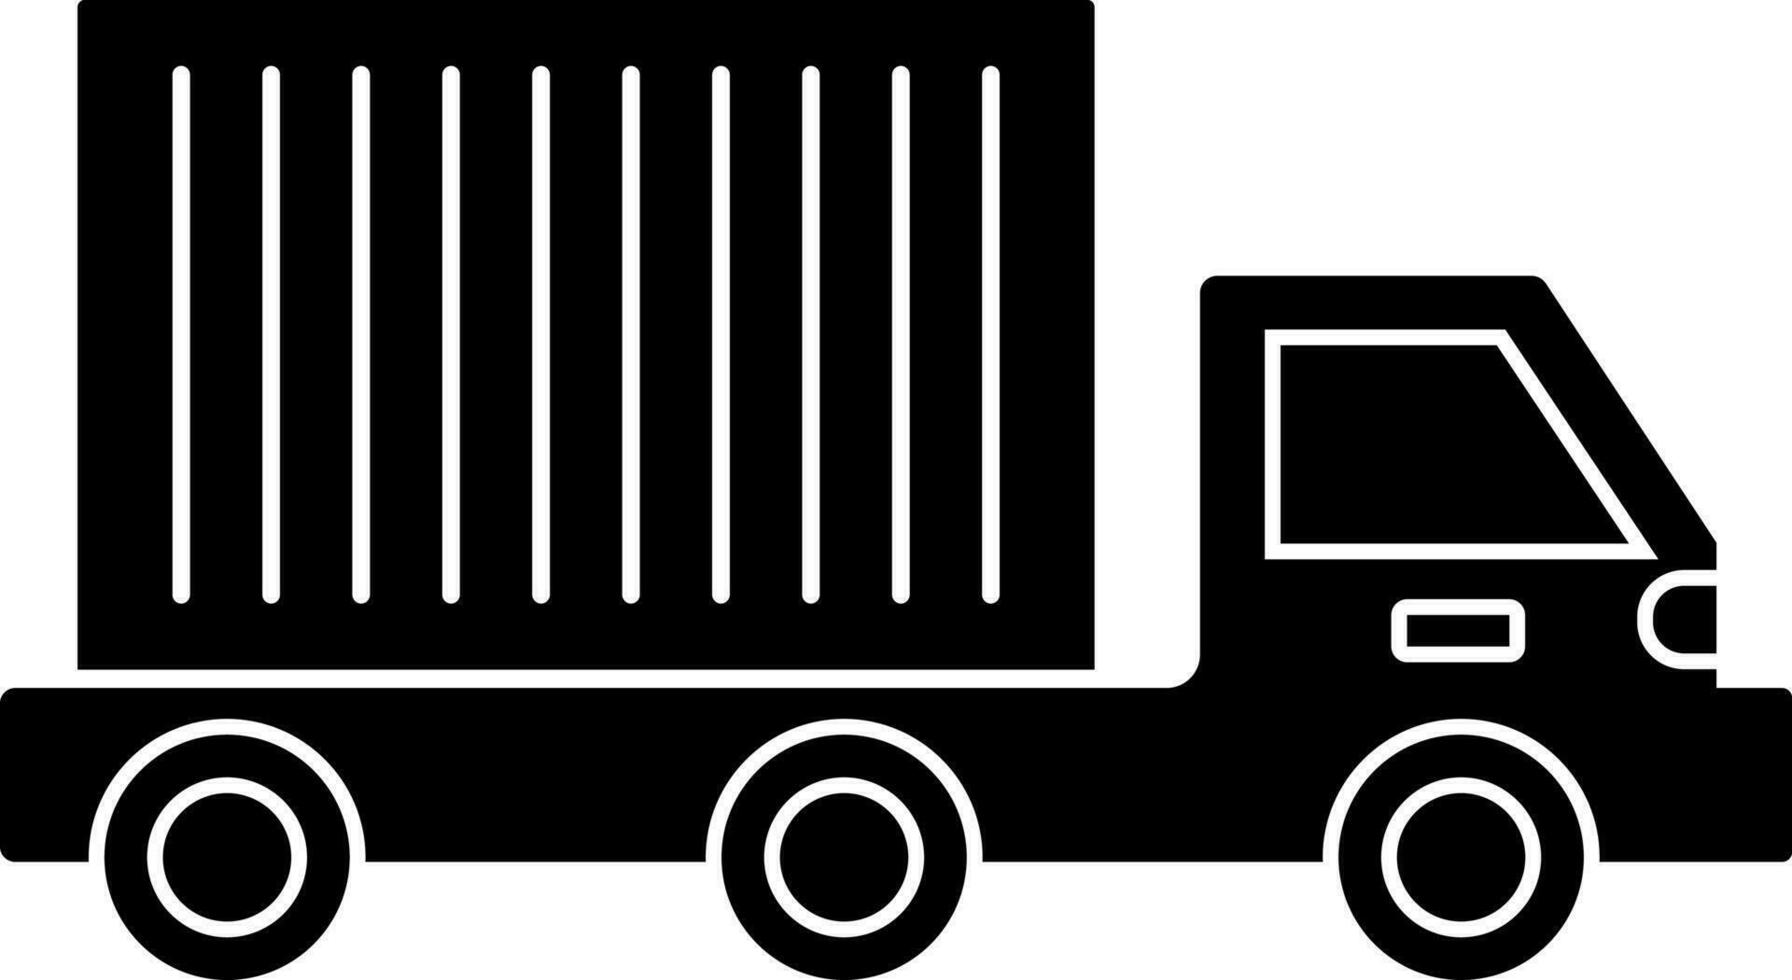 Black and White truck icon or symbol. vector